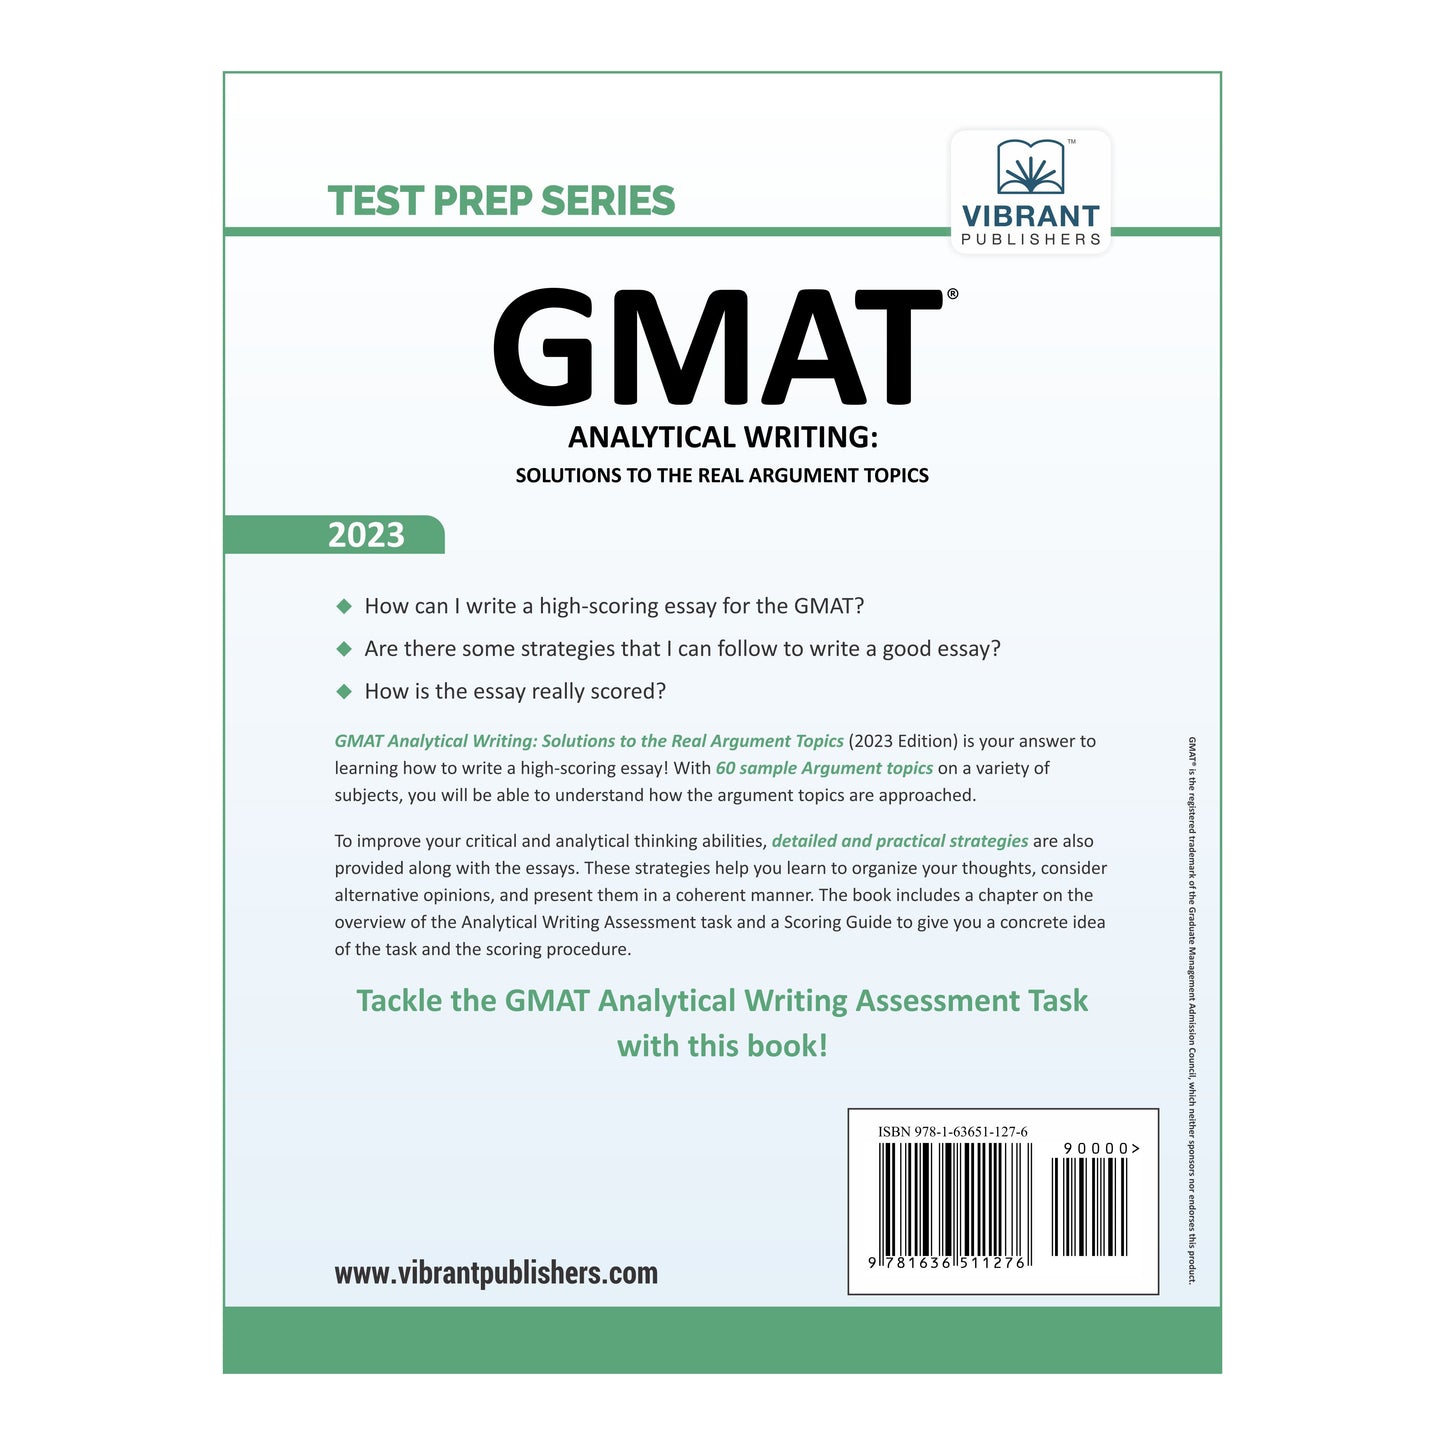 GMAT Analytical Writing: Solutions to the Real Argument Topics (2023 Edition)